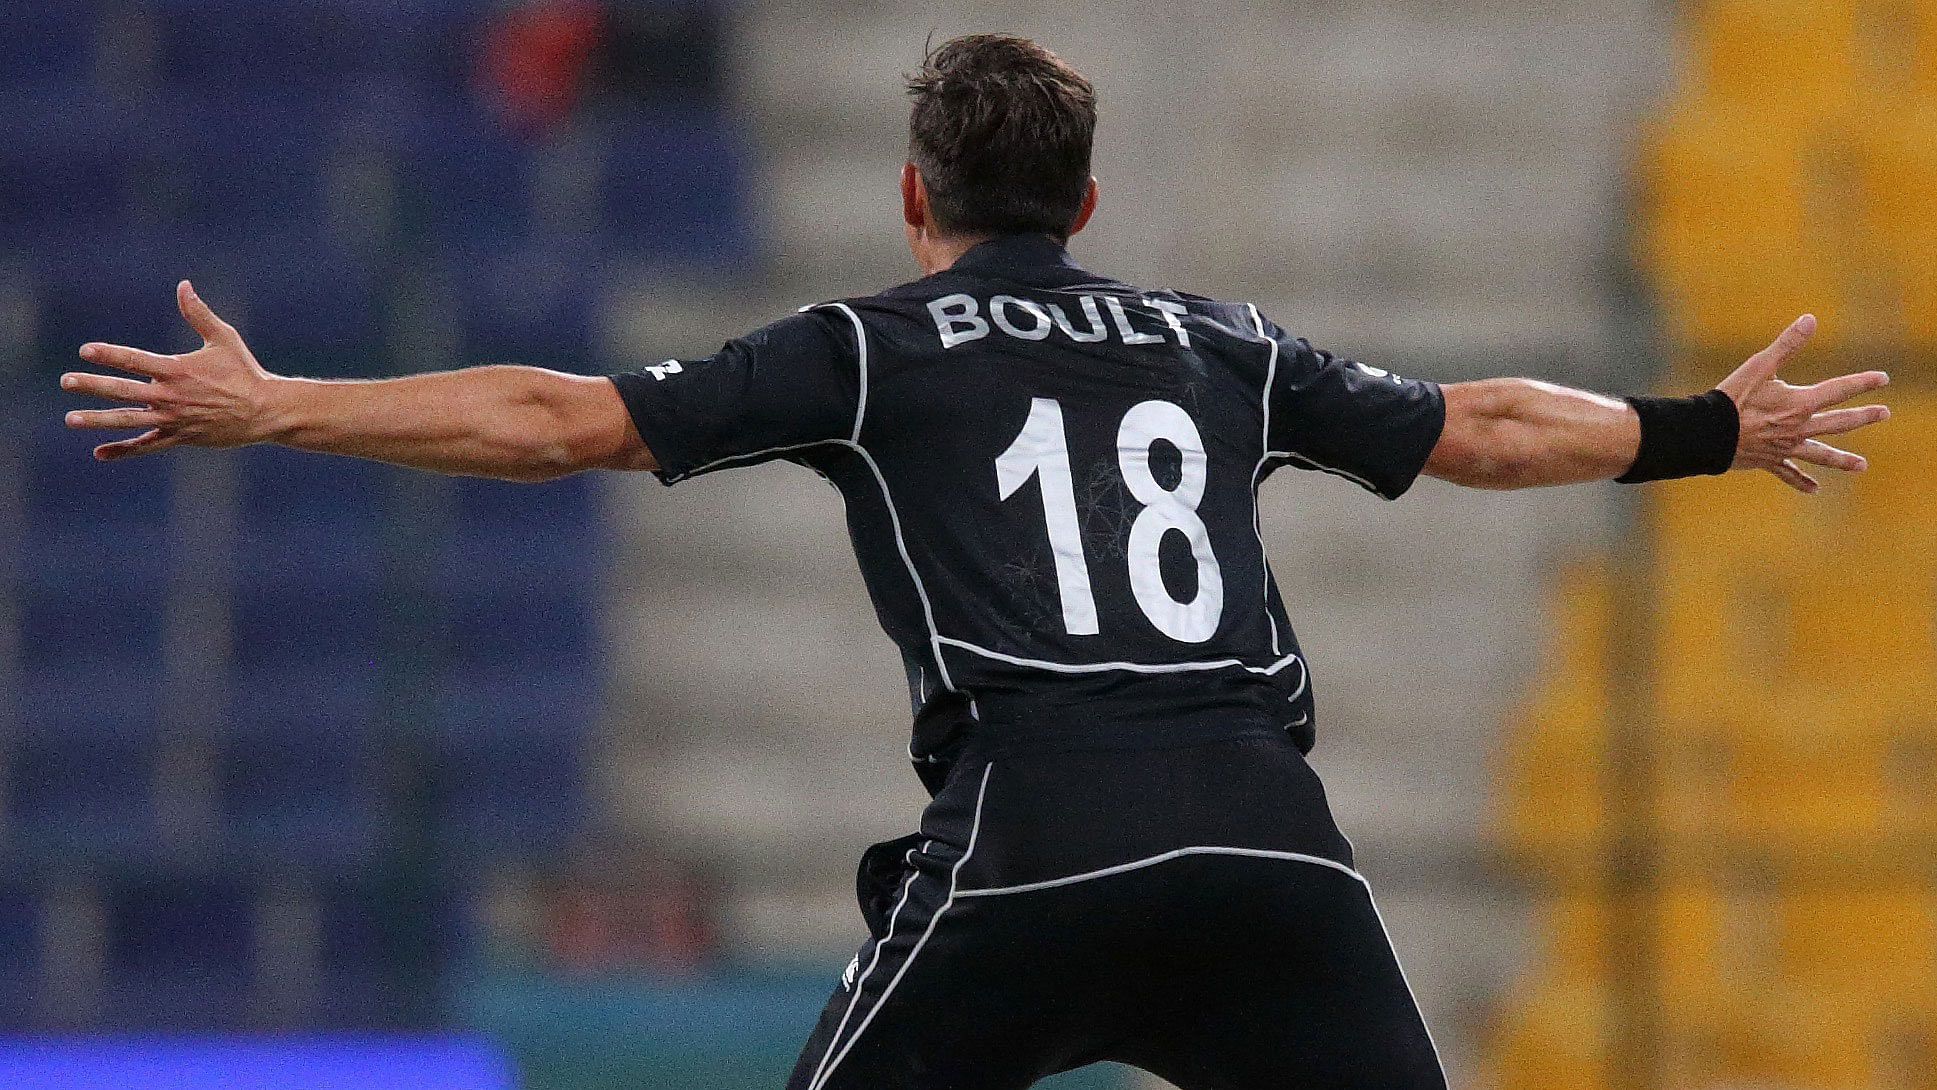 Trent Boult became the third male New Zealand bowler to claim a one-day international hat-trick. 